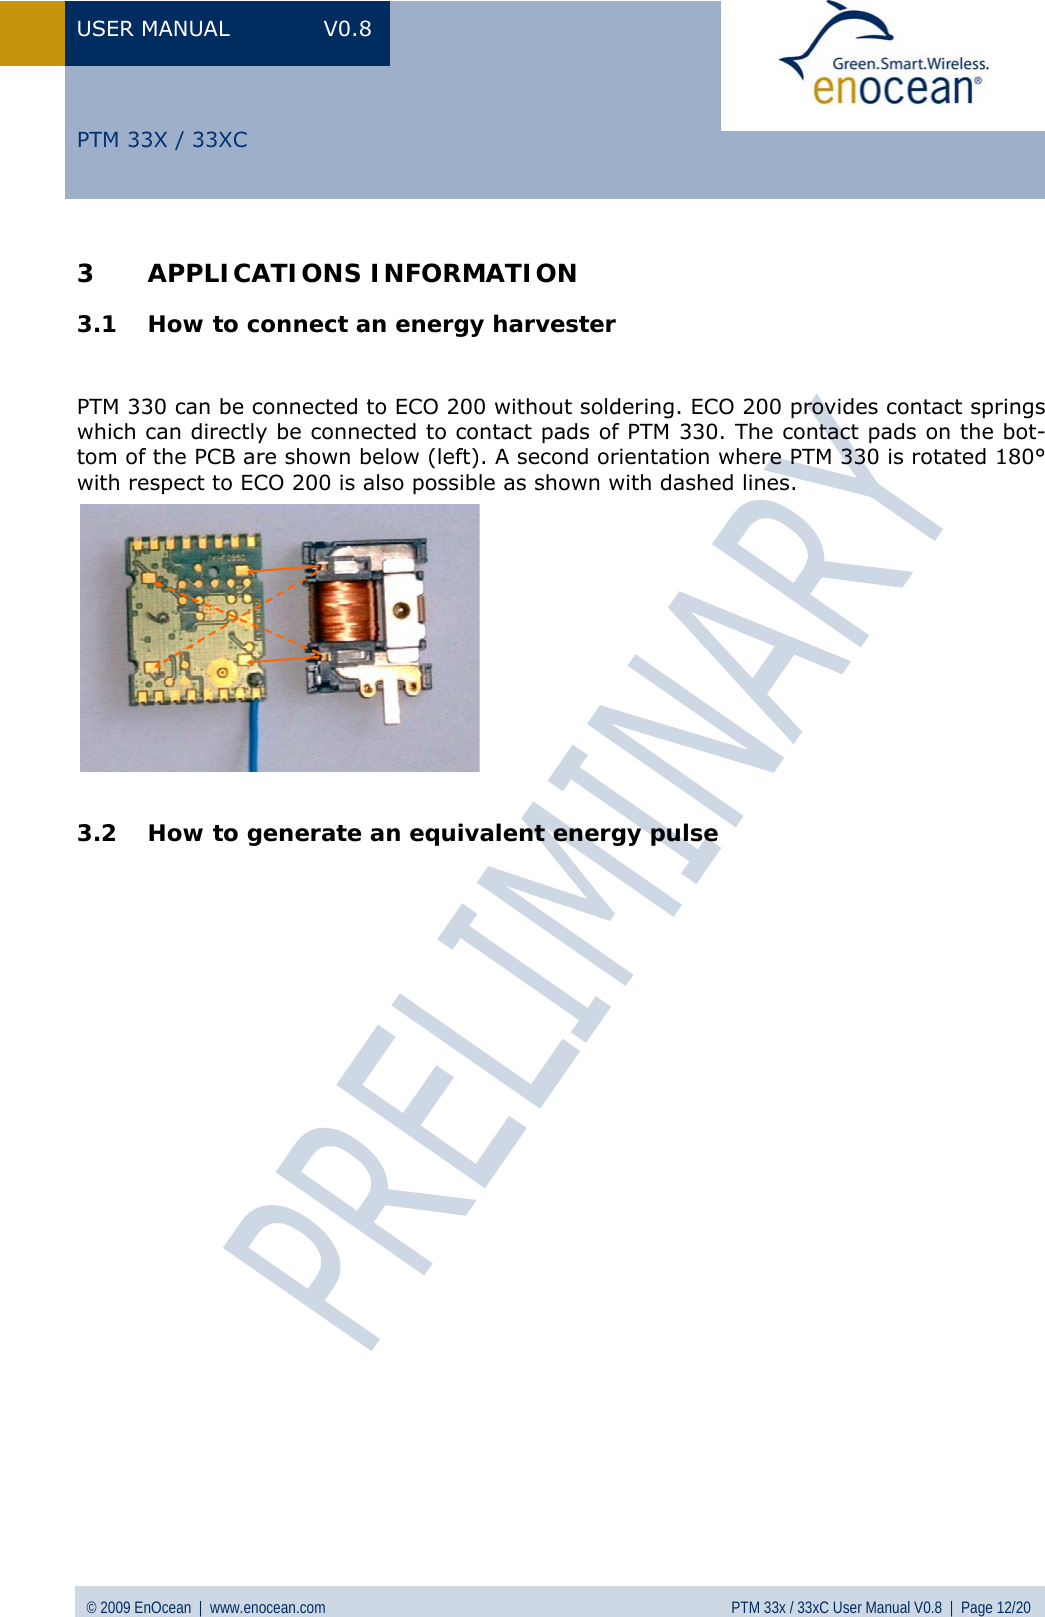 USER MANUAL V0.8 © 2009 EnOcean  |  www.enocean.com  PTM 33x / 33xC User Manual V0.8  |  Page 12/20   PTM 33X / 33XC 3 APPLICATIONS INFORMATION 3.1 How to connect an energy harvester    PTM 330 can be connected to ECO 200 without soldering. ECO 200 provides contact springs which can directly be connected to contact pads of PTM 330. The contact pads on the bot-tom of the PCB are shown below (left). A second orientation where PTM 330 is rotated 180° with respect to ECO 200 is also possible as shown with dashed lines.  3.2 How to generate an equivalent energy pulse                          